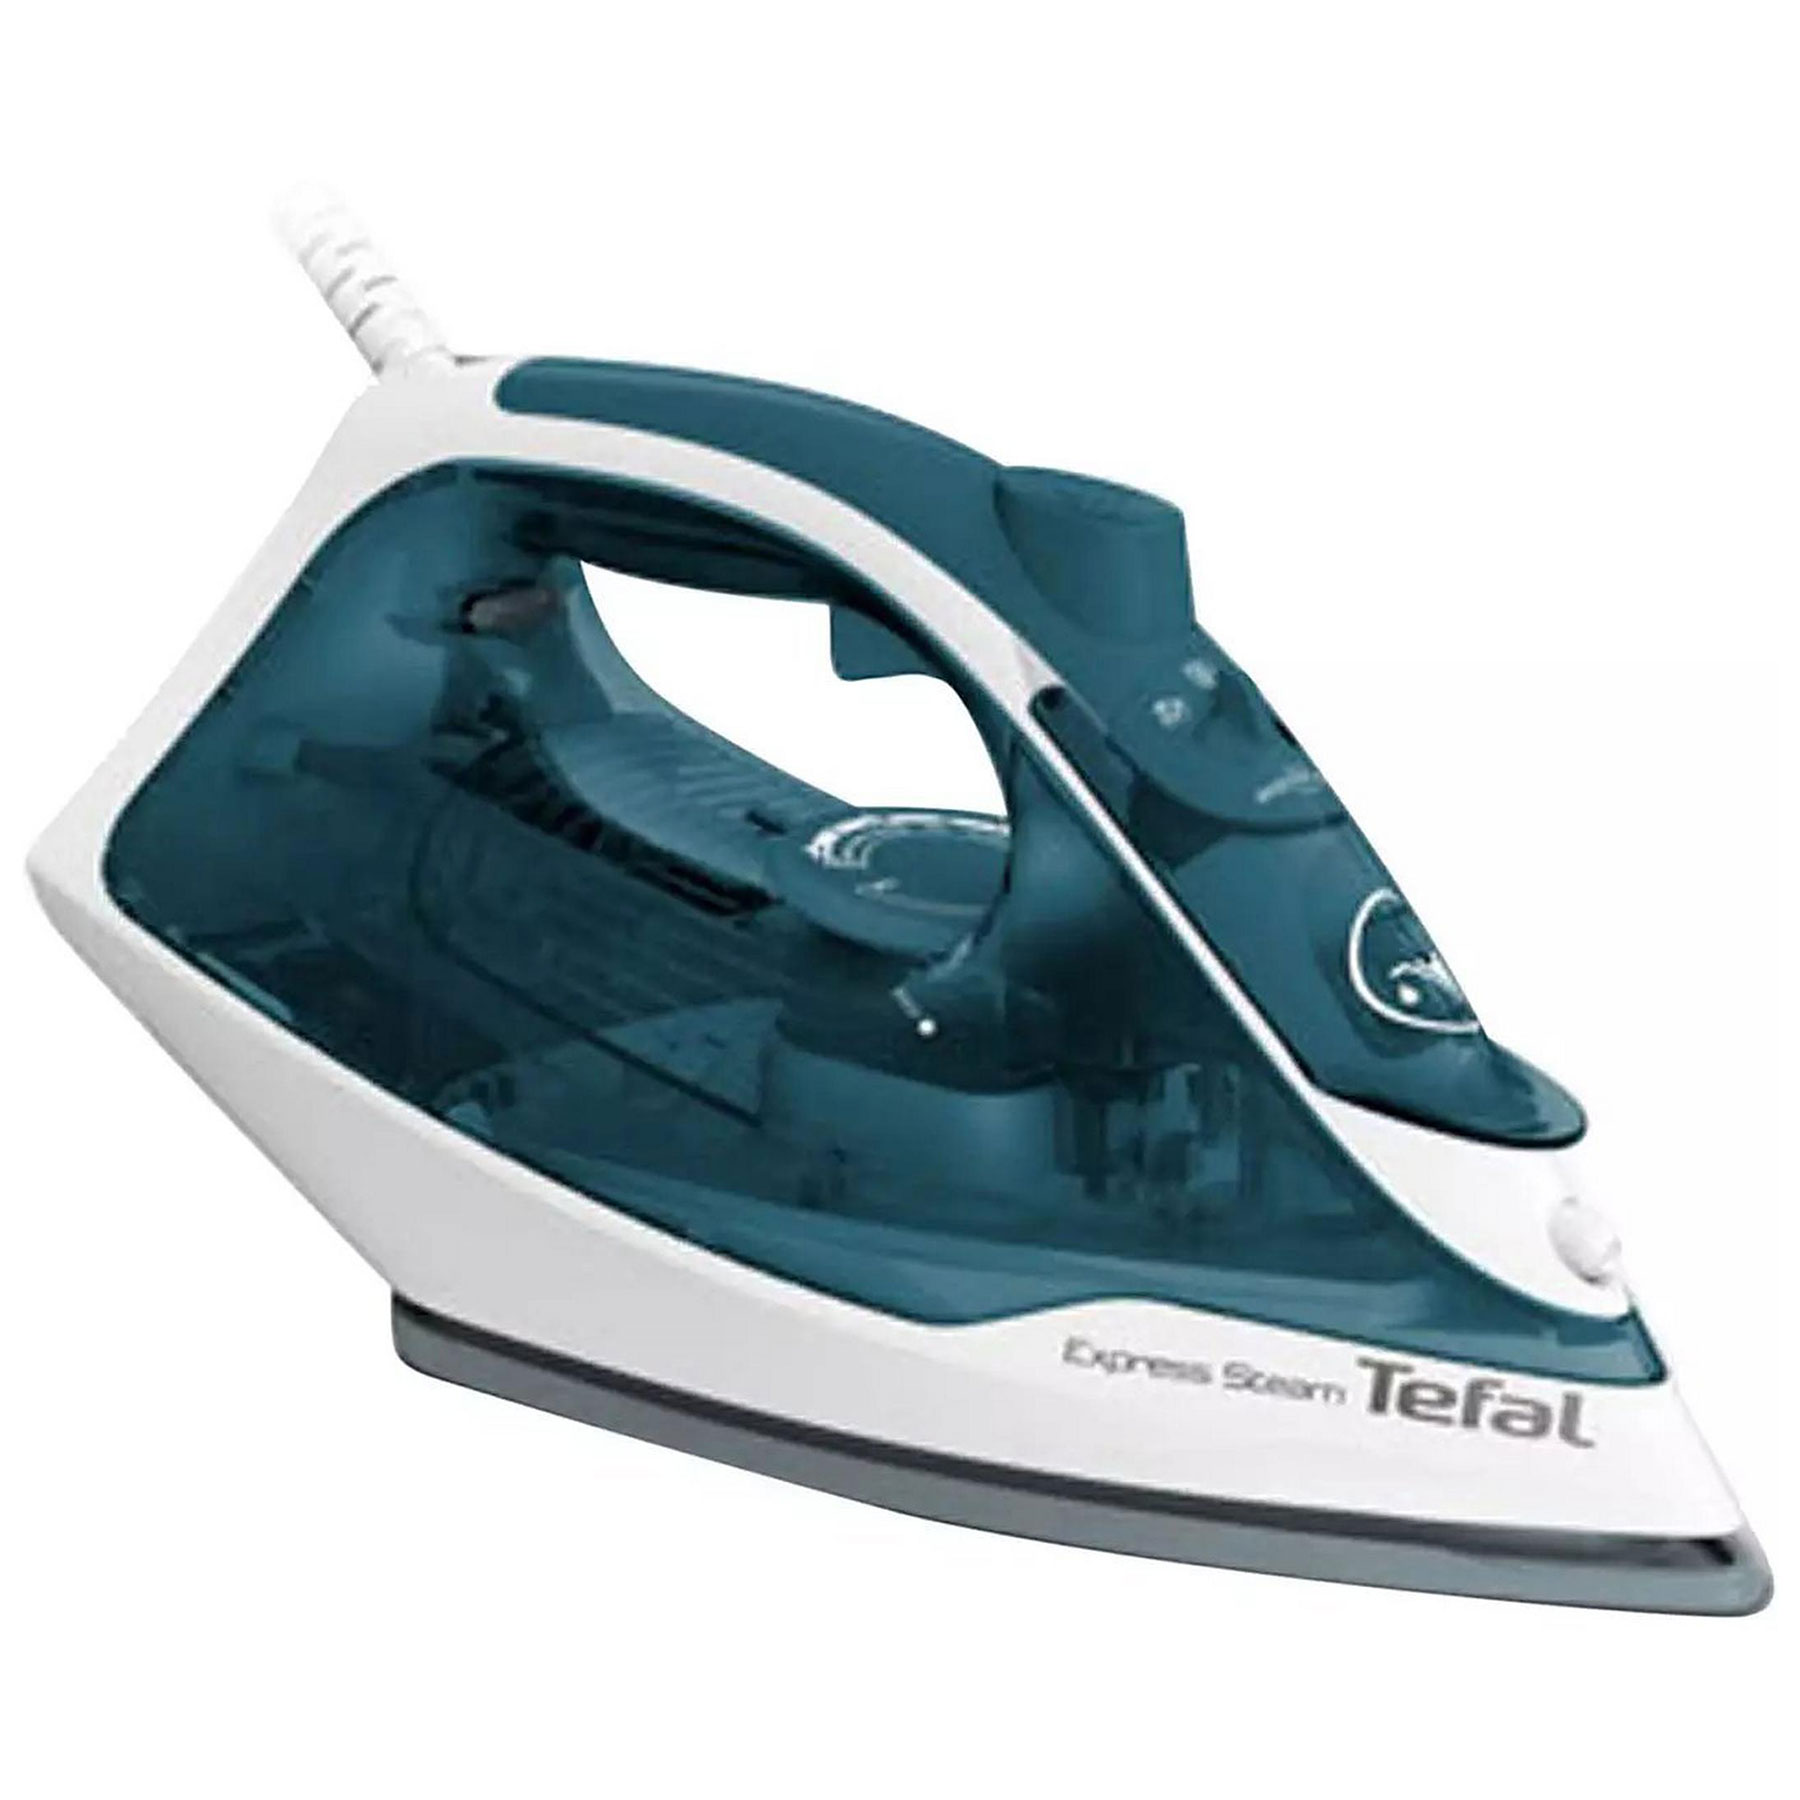 Image of Tefal FV2830G0 Express Steam Steam Iron 2600W Ceramic Soleplate